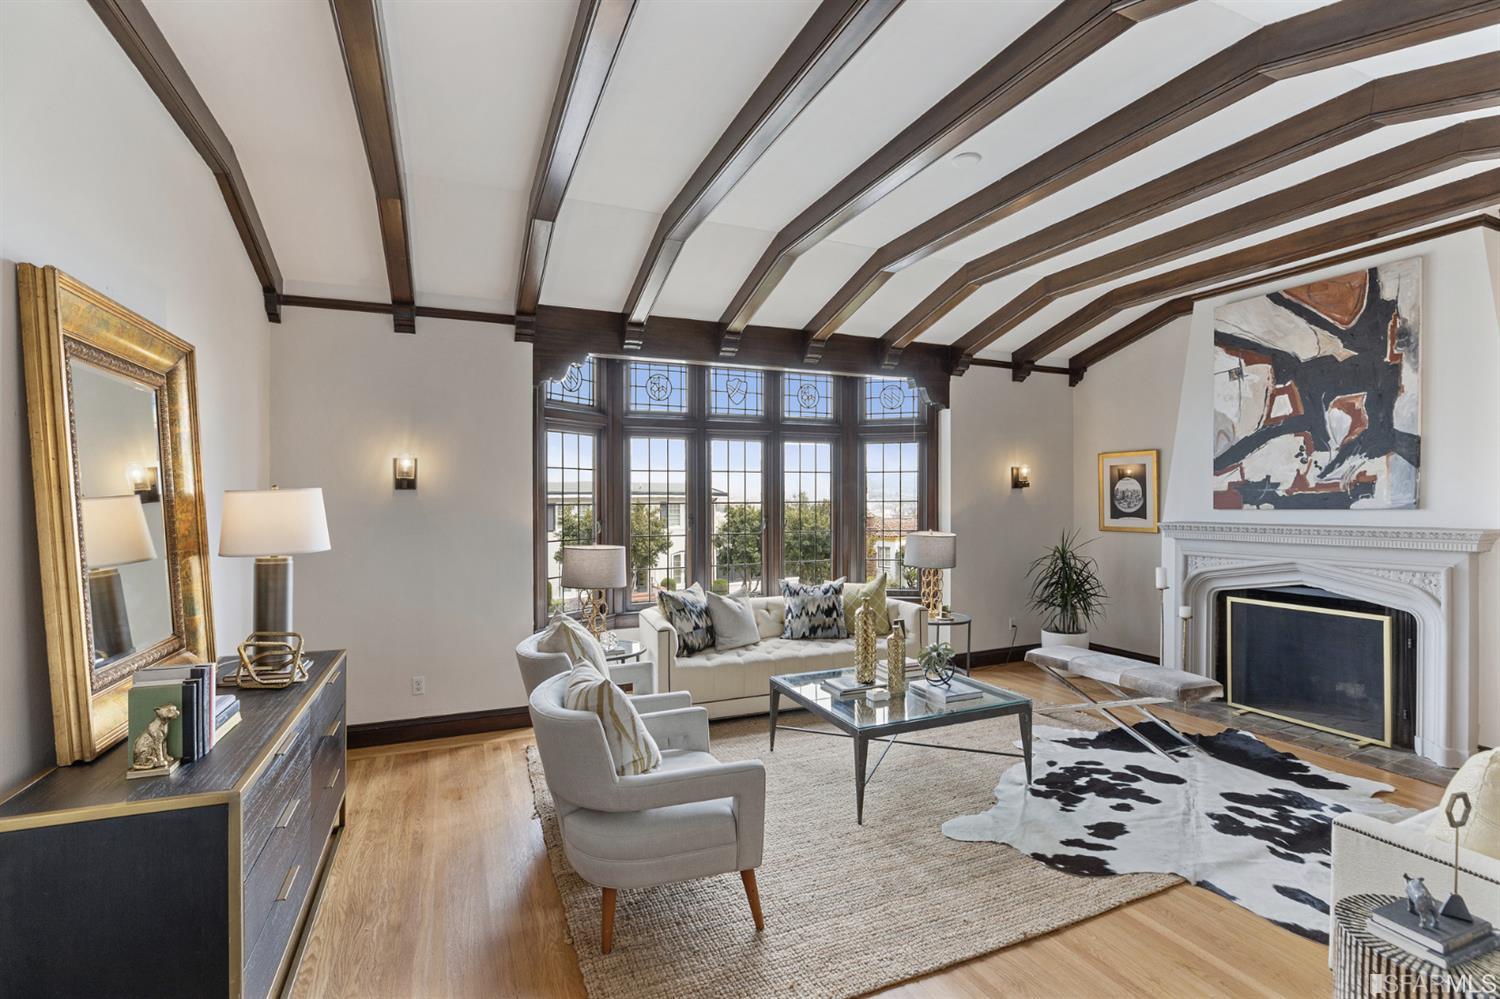 Classic and elegant San Francisco architecture with a formal step-down living room with vaulted ceilings and exposed beams. Enjoy an oversized wood-burning fireplace in the living room.